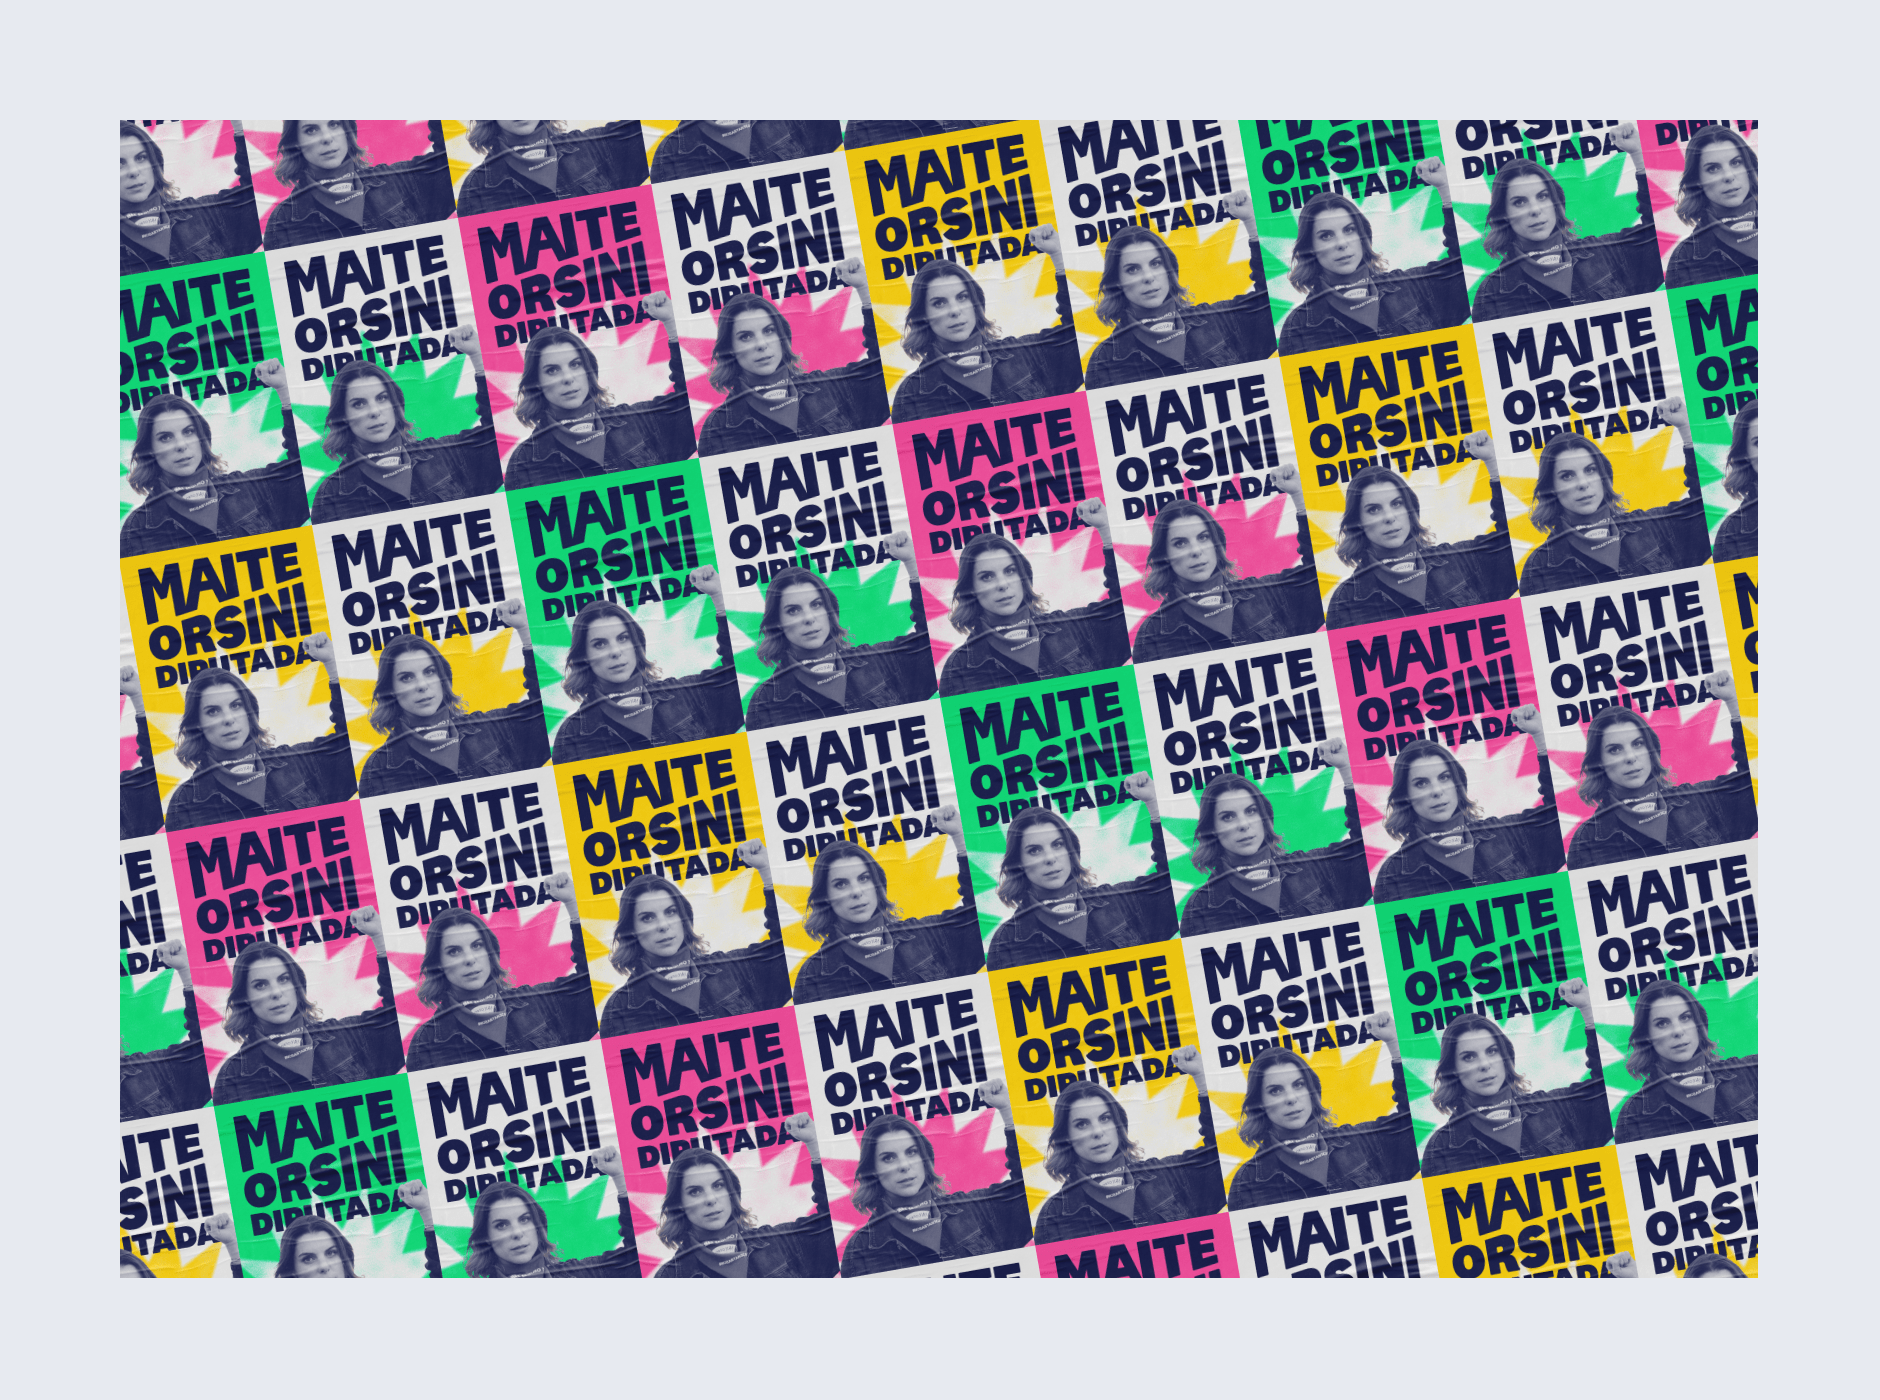 Series of posters with Maite branding laid out in a grid